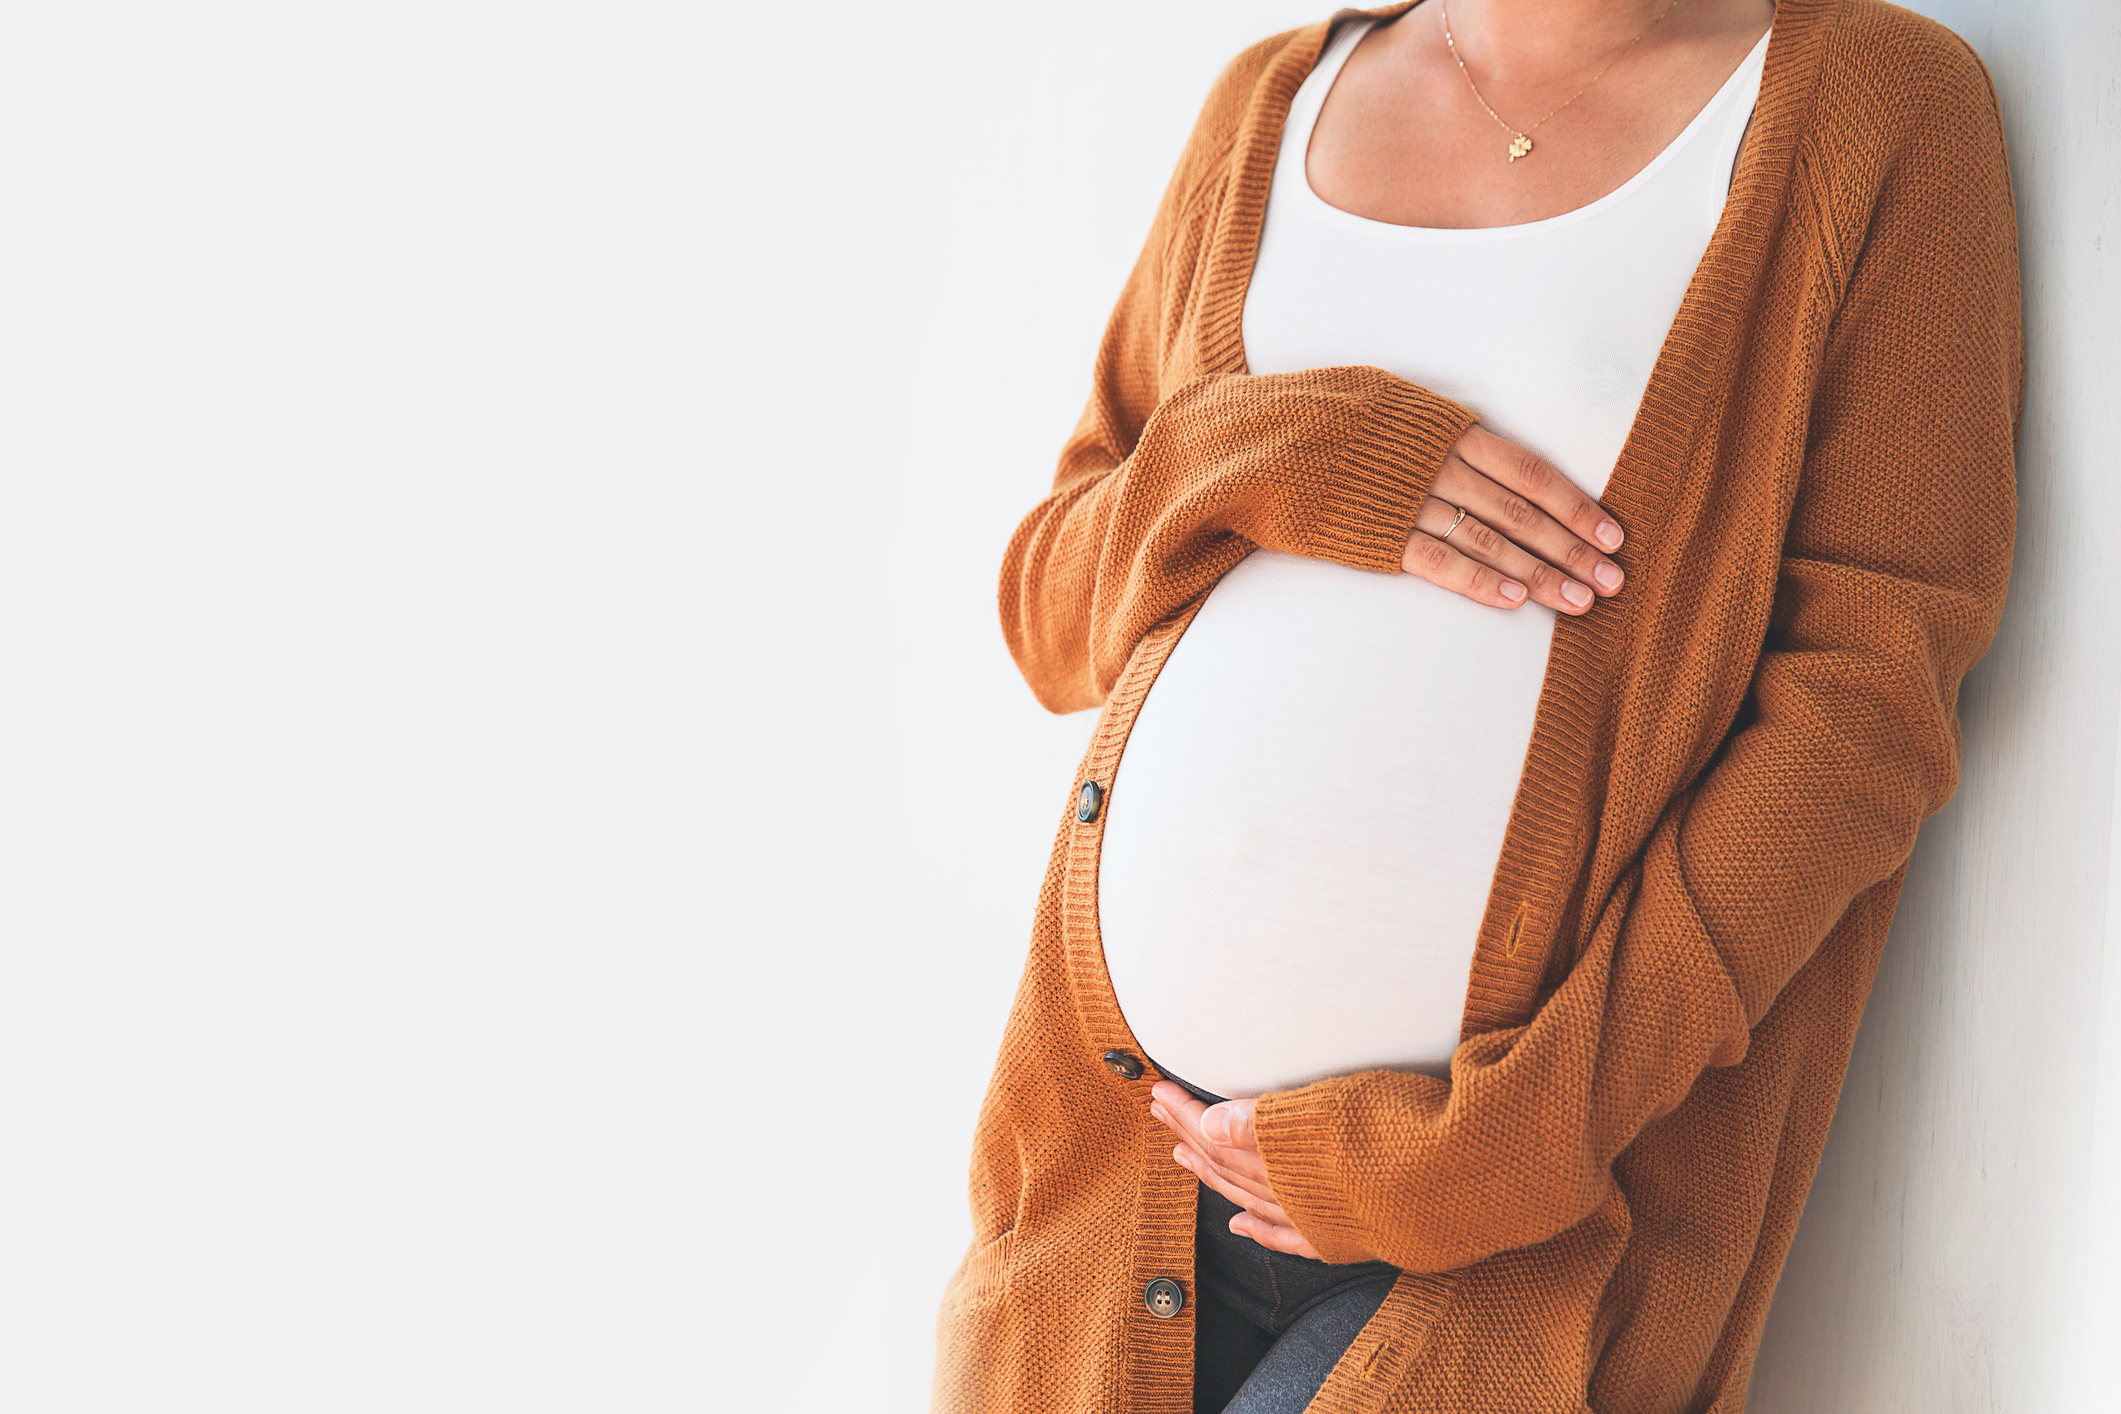 Image of a pregnant woman holder her stomach.